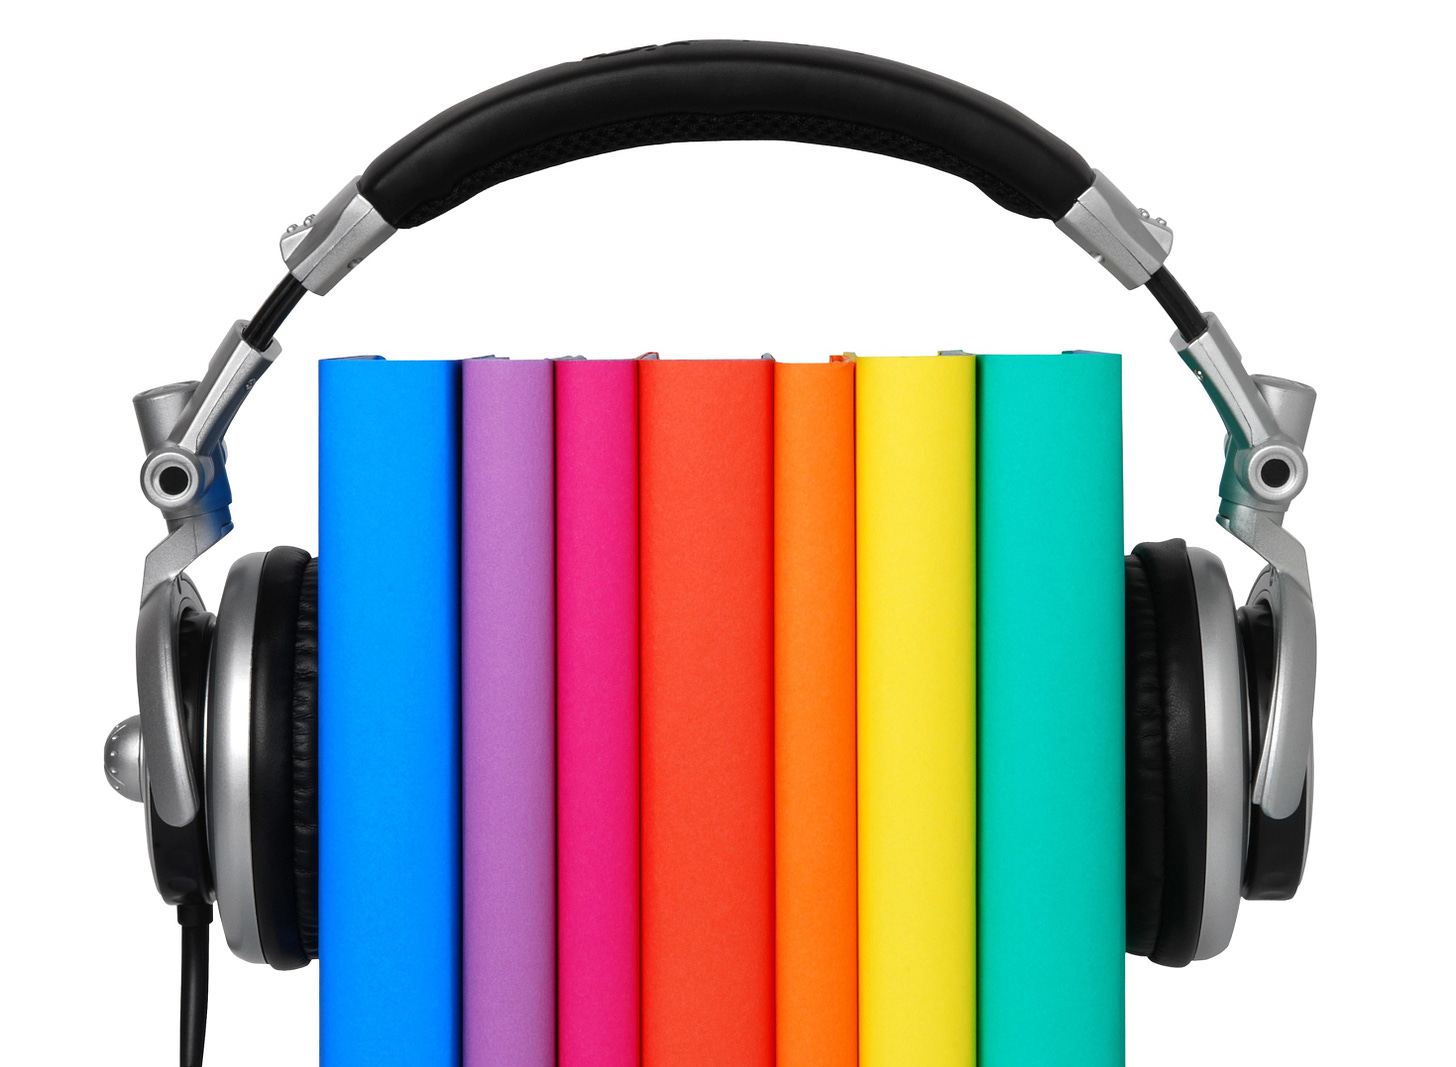 Seven books upright with headphones on them.